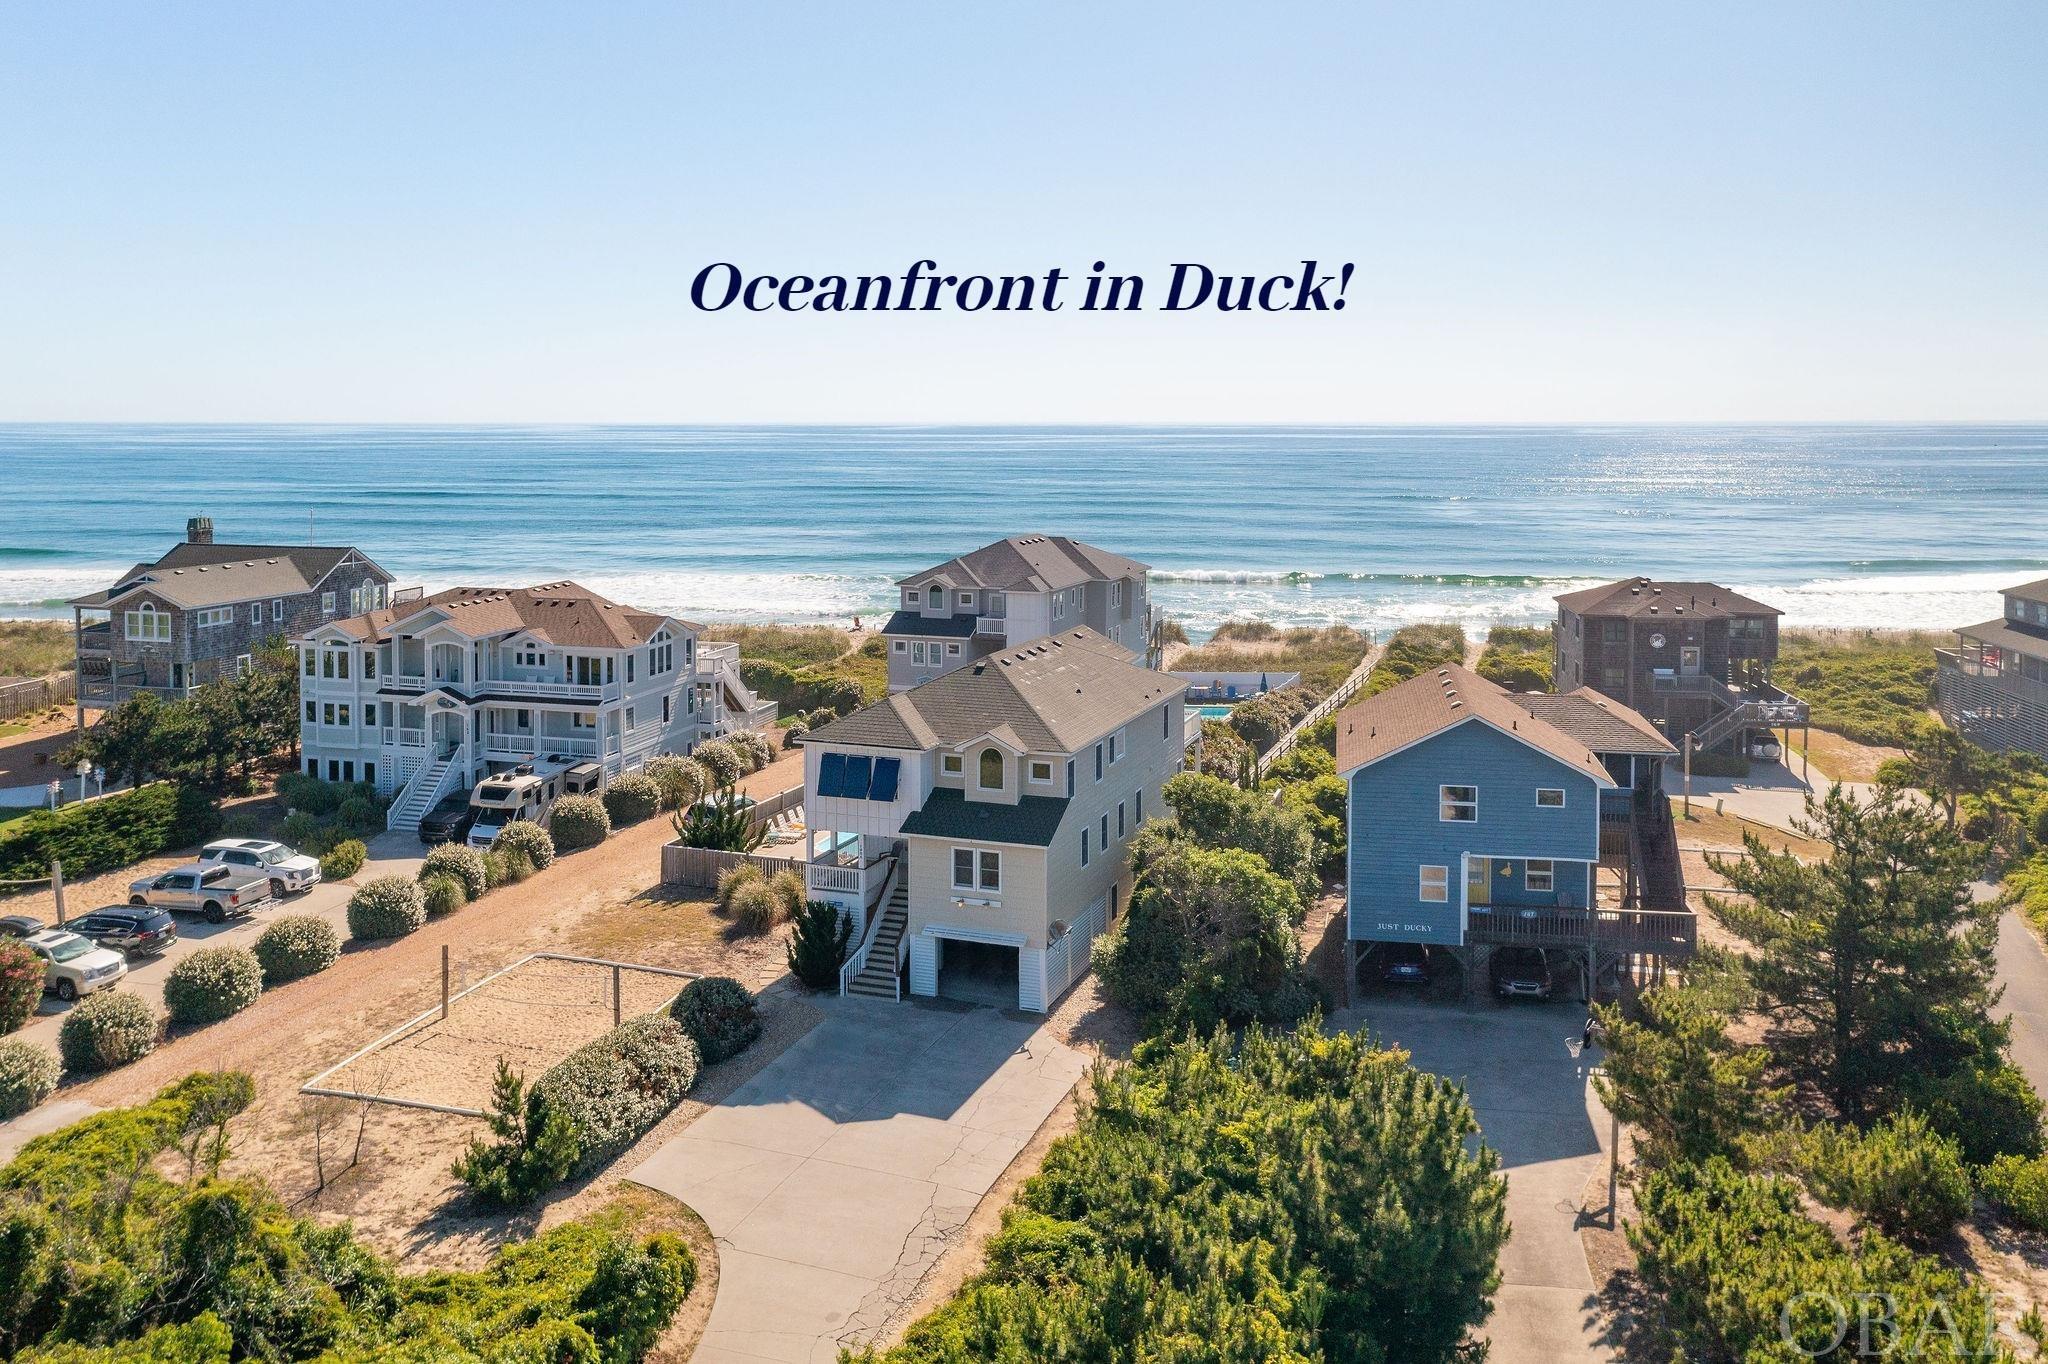 Here is the Duck Oceanfront home you have been WAITING for!  Situated at the end of the street on a cul-de-sac with no thru traffic, this 8 bedroom, 7.5 bath home with 6 Ensuite Bedrooms is THE ONE!  The home has full on OCEAN VIEWS yet set back from the dunes with it's own private walkway, allowing you easy access back and forth to the beach so the property is much more protected than many in the area.  Tired of looking at oceanfront homes with views only from the top level? This home features additional OCEAN VIEWS FROM THE MID LEVEL where two of the ensuite bedrooms are situated with deck access! The upper level floor plan was well though out and is IDEAL with an open concept layout with the living, dining, and kitchen all on the ocean side allowing for a ton of ocean views from the common areas.  There are TWO west facing Ensuite bedrooms on the top level as well as a powder room for guests.  The kitchen is amazing with two refrigerators, two dishwashers, two oven/ranges, huge island bar with plenty of seating and a separate coffee/wine bar area with its own sink and wine cooler! Looking for all the bells and whistles?  Well look no further, as this home features an ELEVATOR, game room with pool table and kitchenette with full size fridge and microwave and bath accessible to pool area, theatre room, and access out to the private pool, hot tub, putting green, and gate to private walkway to the OCEAN.  Make an appointment today to see this home before it's scooped up by a very lucky buyer!  Over 223K in gross rental income booked for 2022 and almost 90K already booked for 2023! More pictures coming soon! Please Google " Beach Music Twiddy Duck" to access the rental site for this home for more details! Attention Investors: If 2023 calendar is opened up from March through the end of the year this home is capable of producing 280K plus in gross rental income!